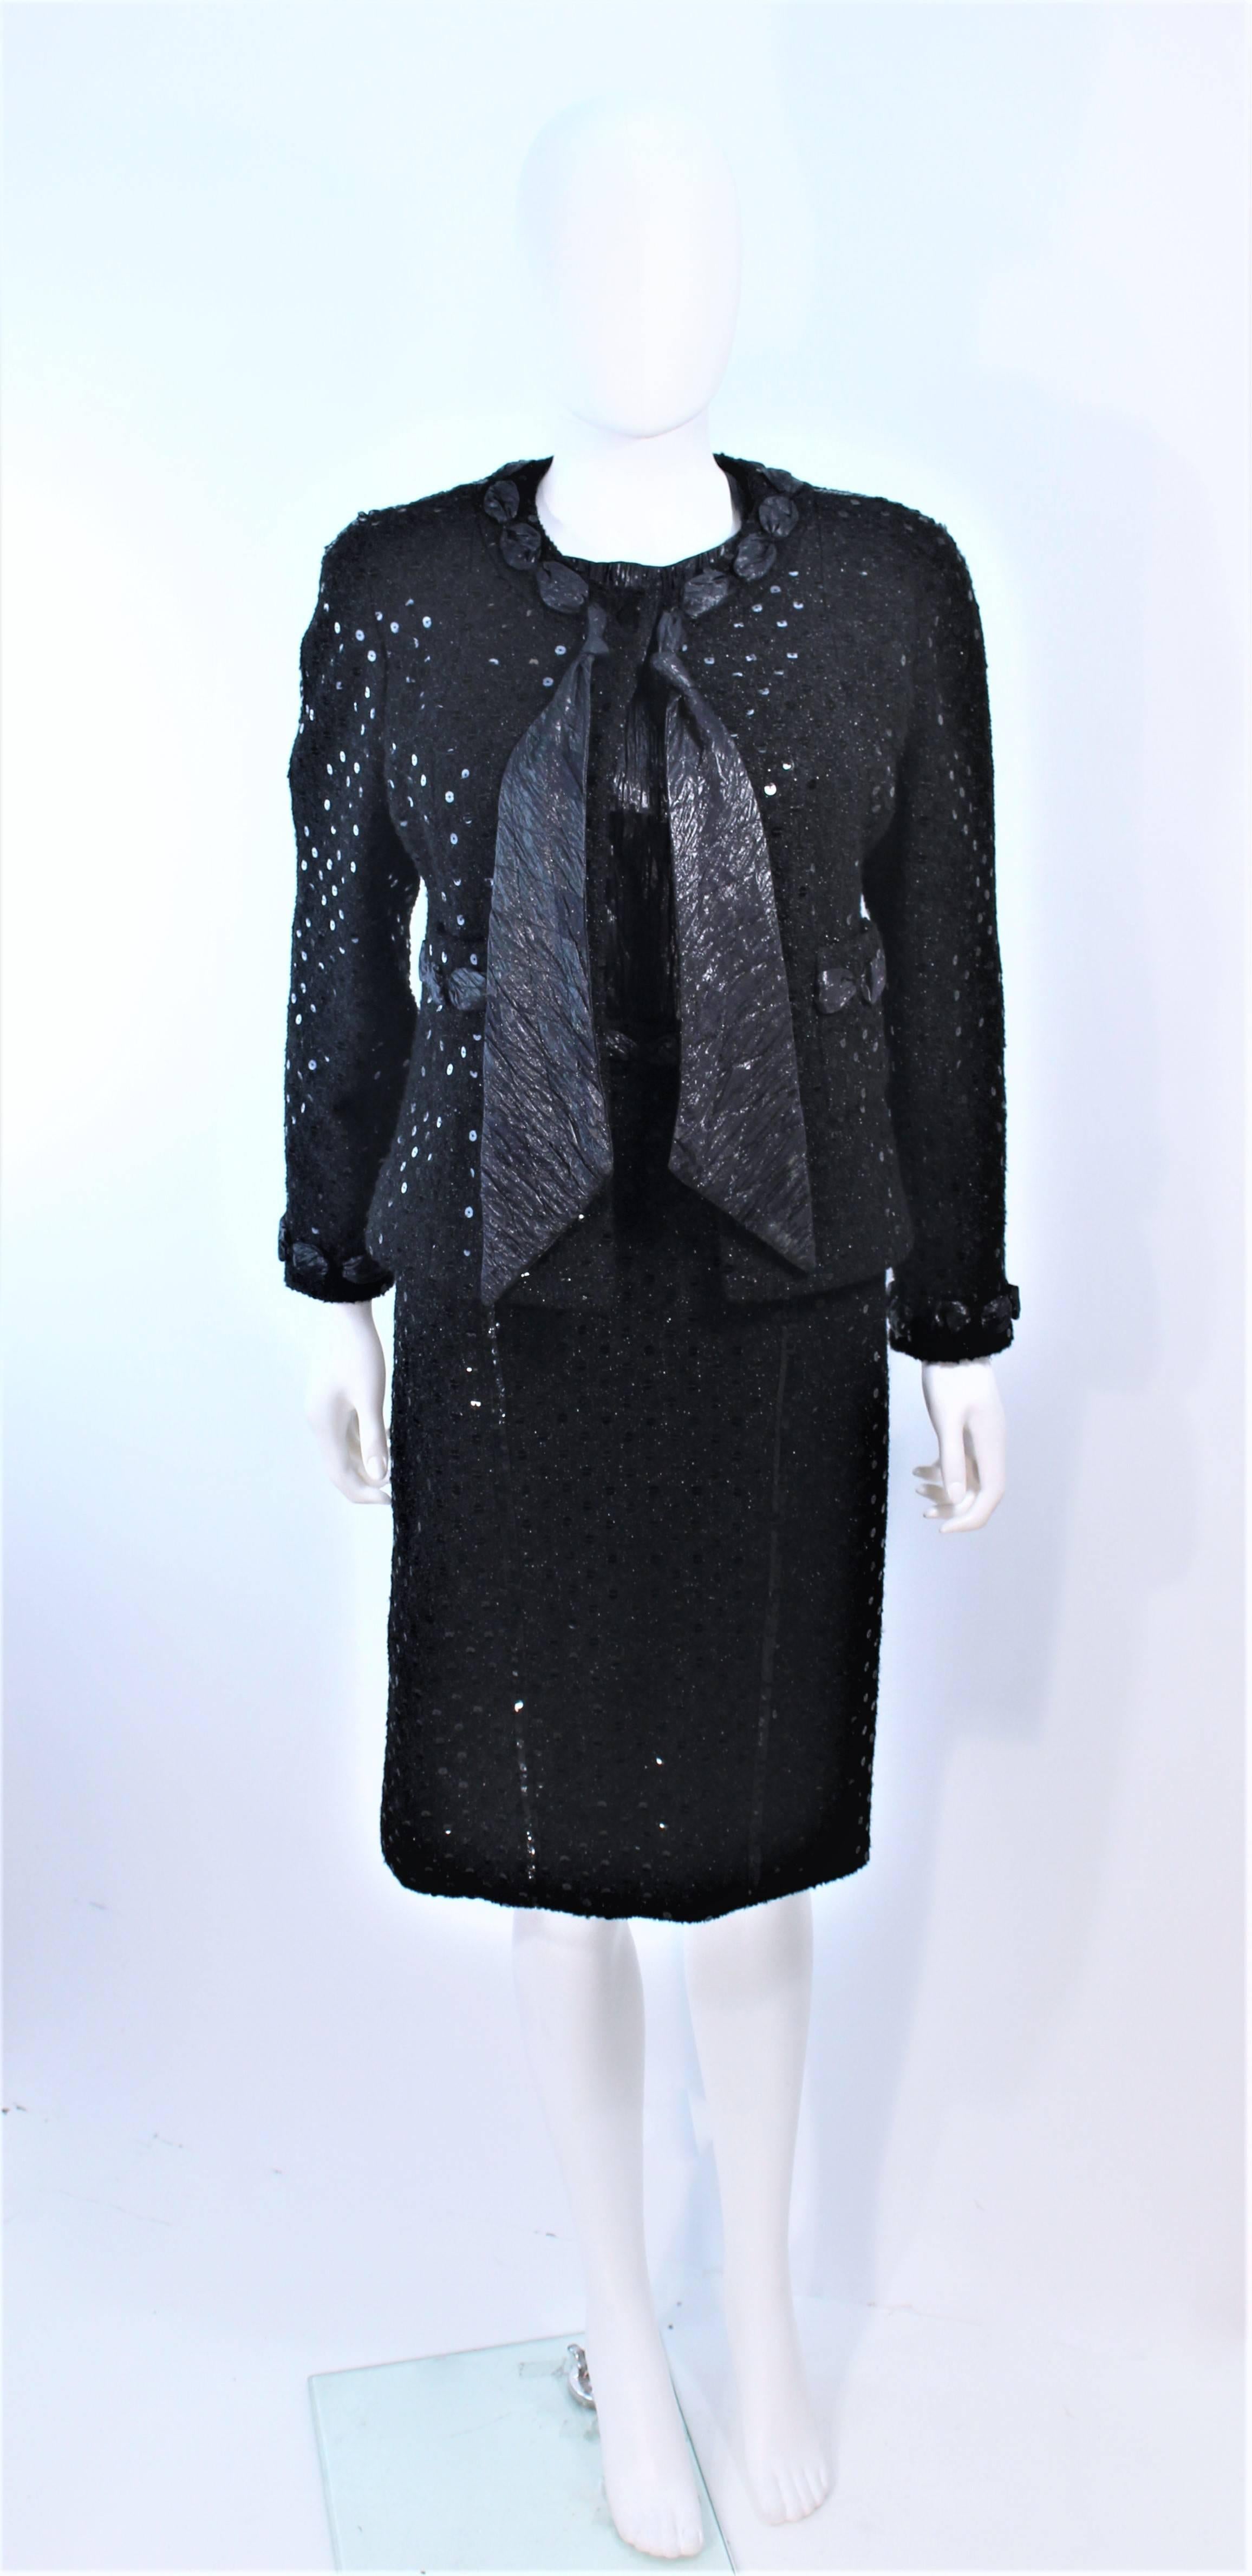 This Chanel skirt suit is composed of black silk lame, and metallic infused wool boucle. The jacket features faceted black center front button closures. the tank style top has a criss-cross back. The skirt has a classic pencil style with zipper